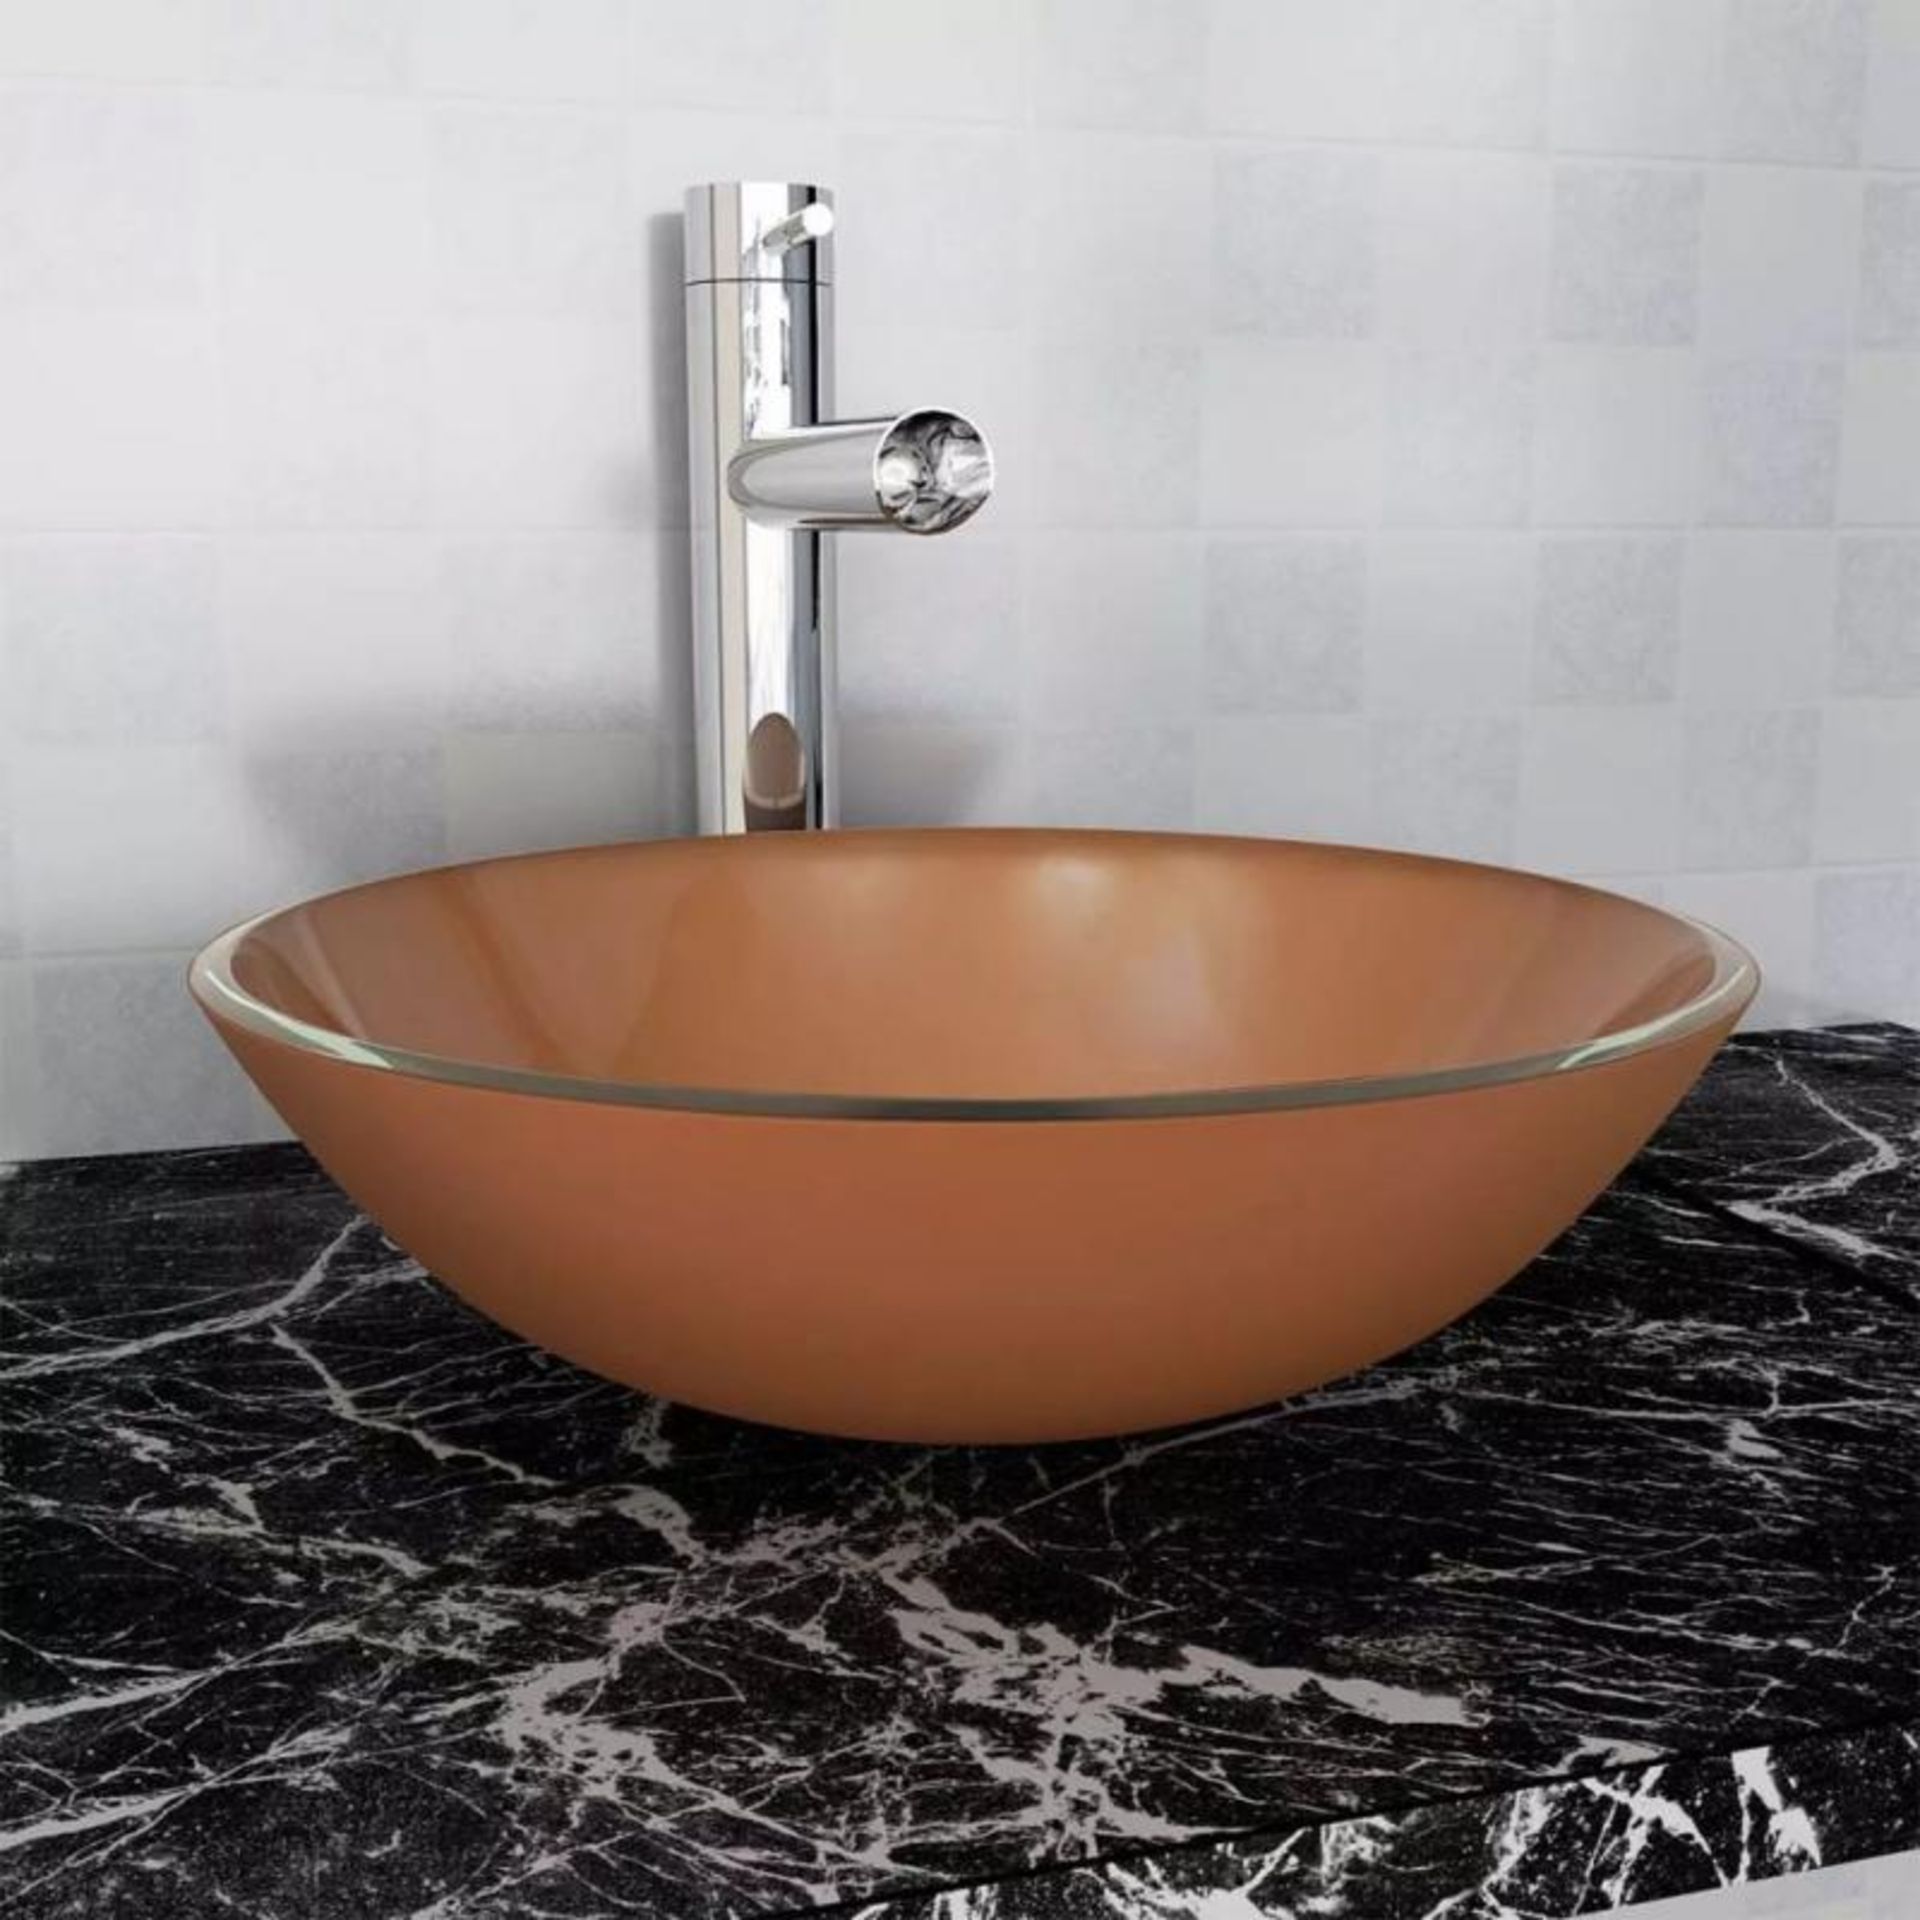 1 x Waterfront Tempered Glass Basin - Brown - New & Boxed Stock - Ref: BC156 - CL406 - Location: Che